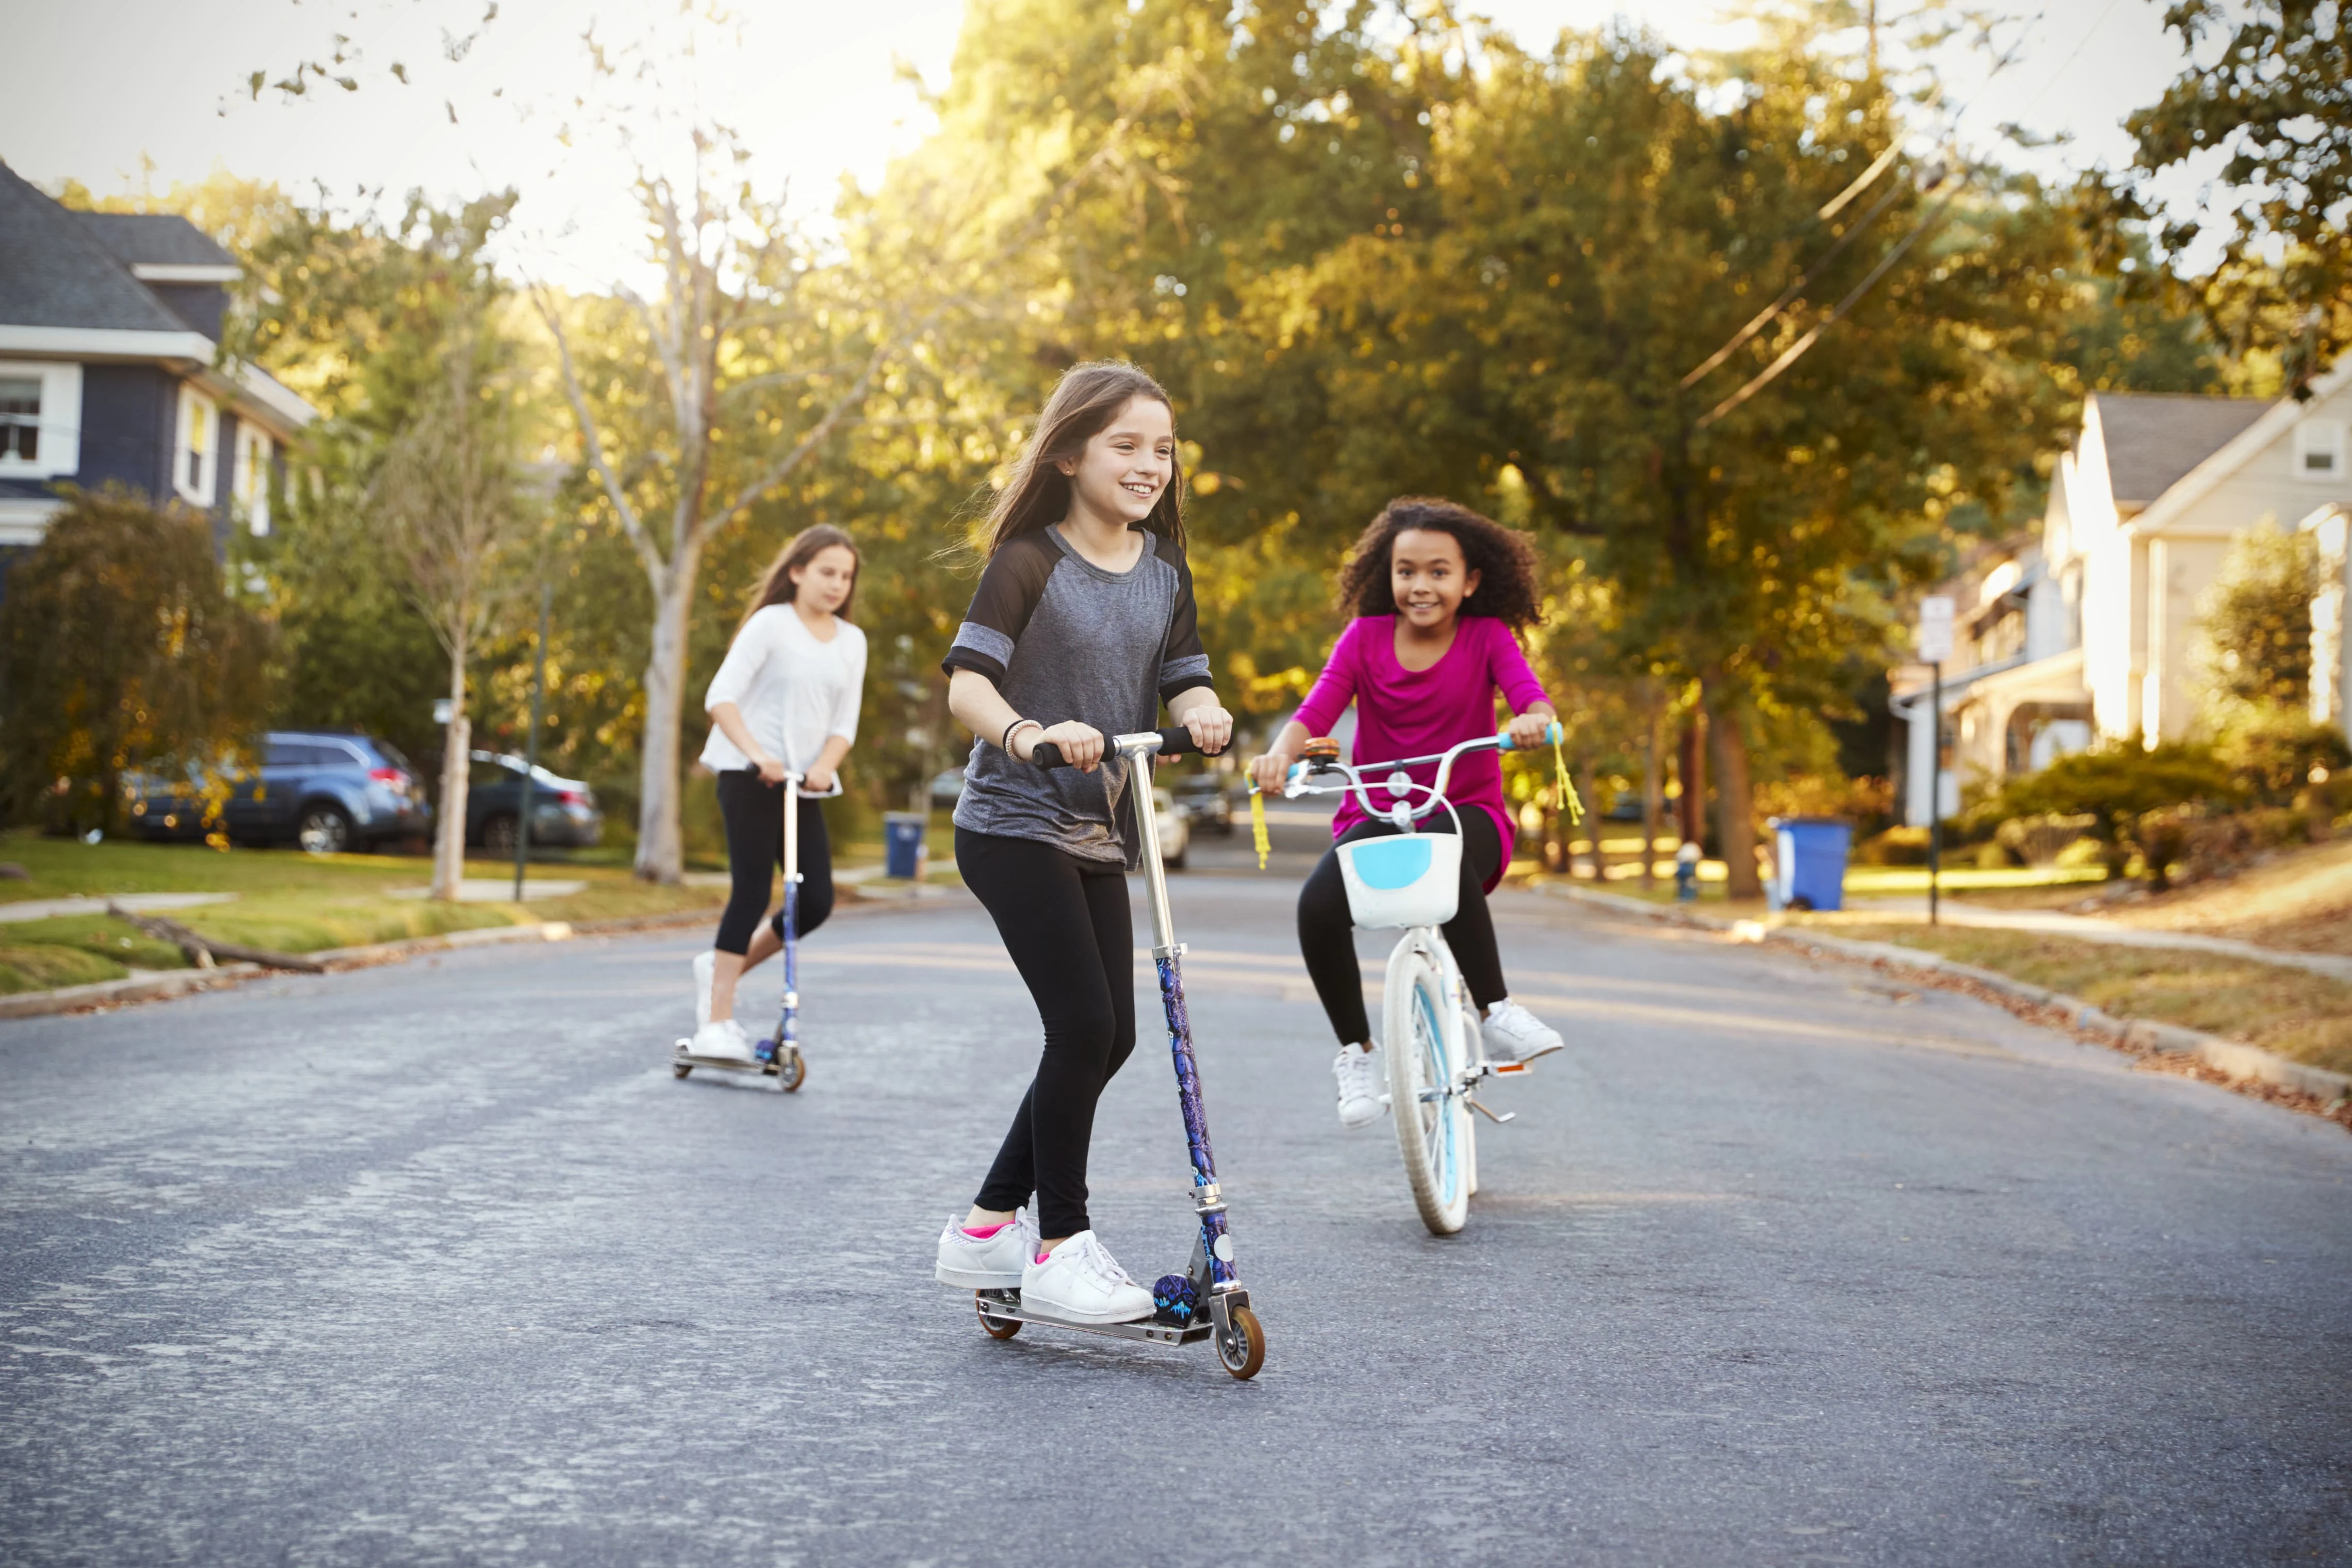 Young girls riding scooters and bicycles